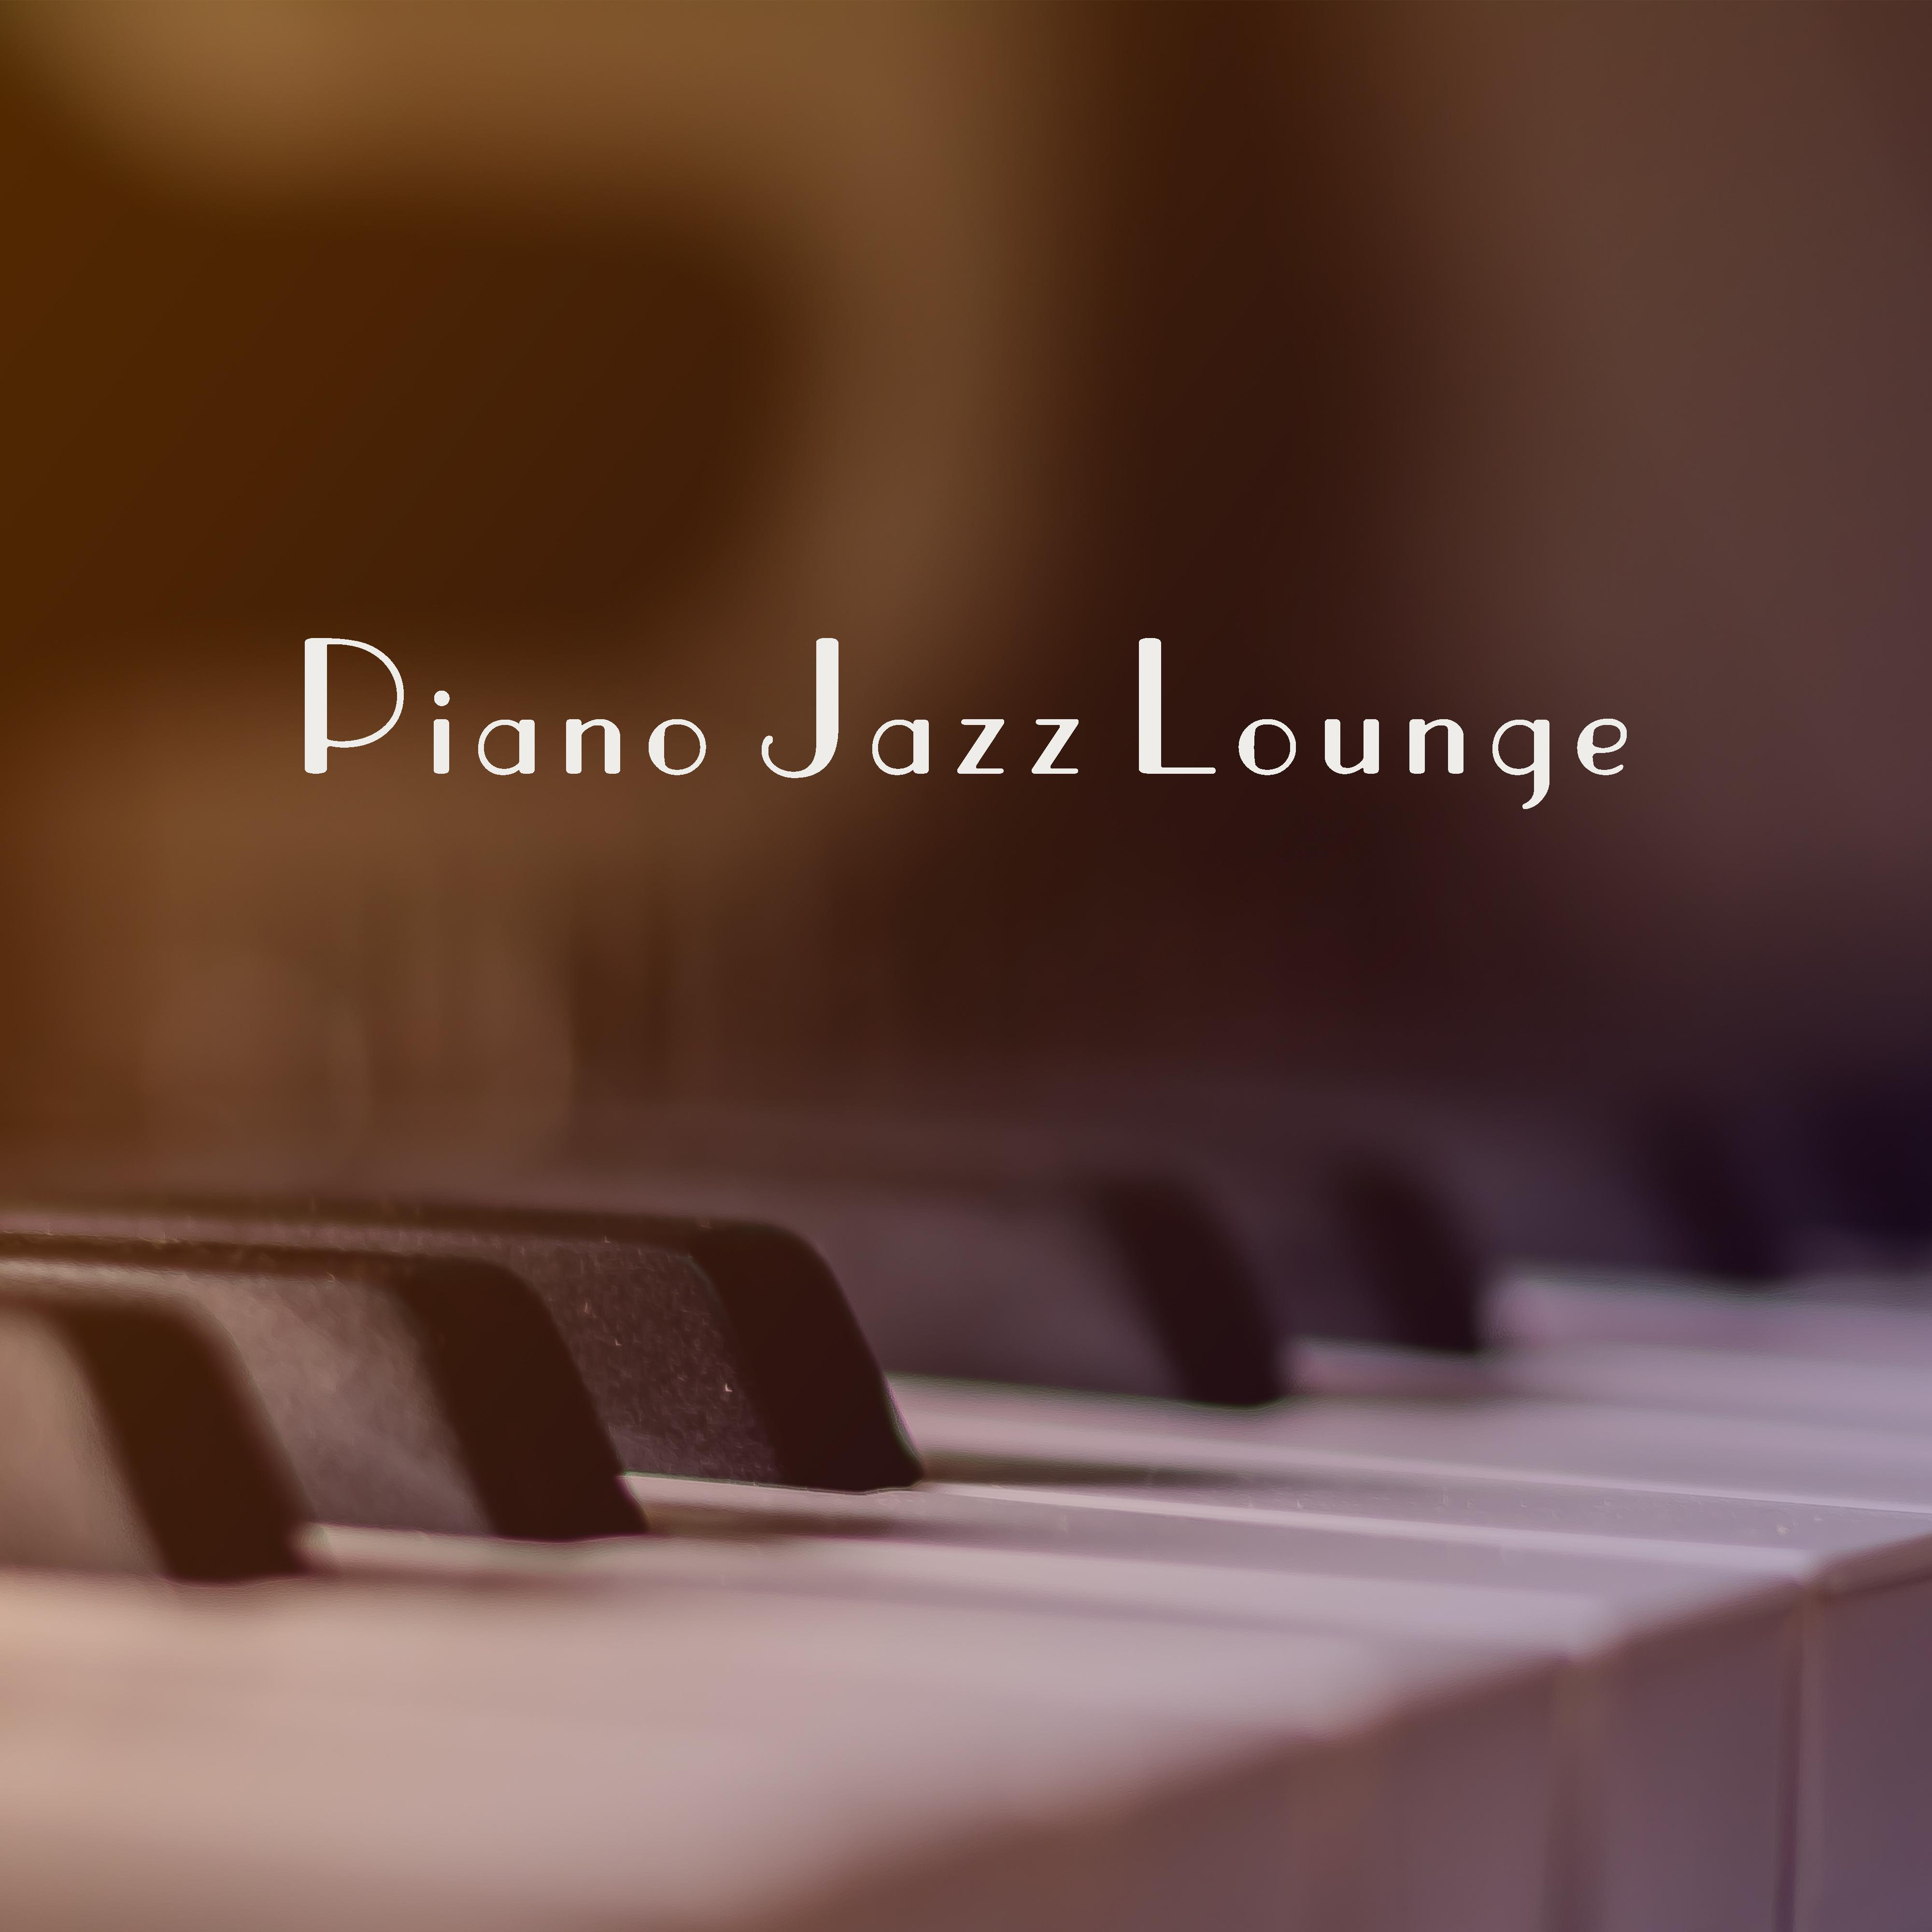 Piano Jazz Lounge – Soft & Relaxing Jazz Music, Peaceful Sounds to Calm Down & Rest, Deep Rest, Soft Instrumental Music